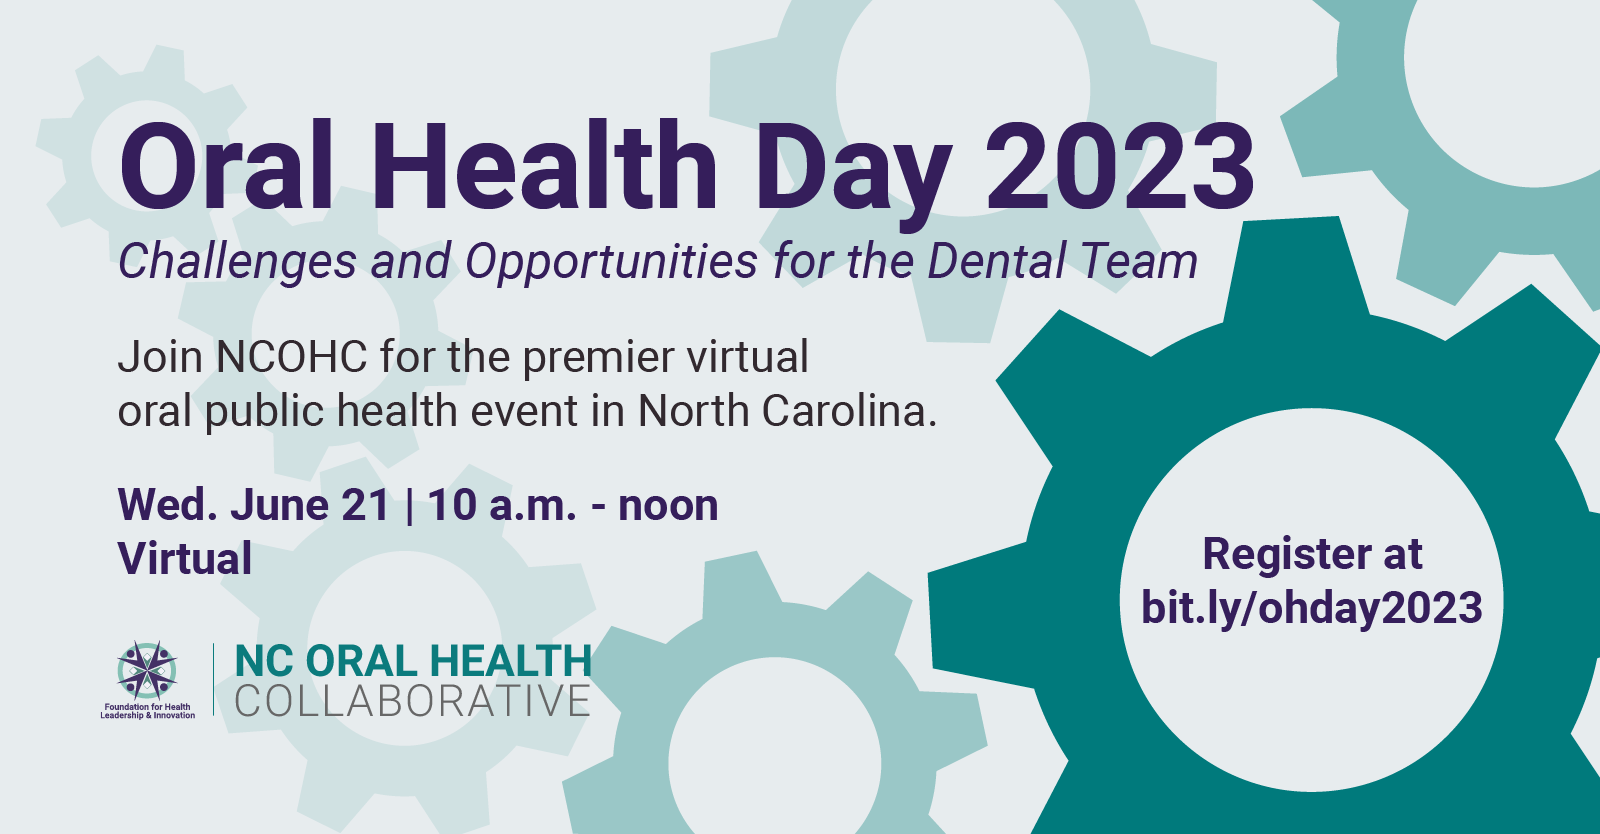 Oral Health Day 2023 Image